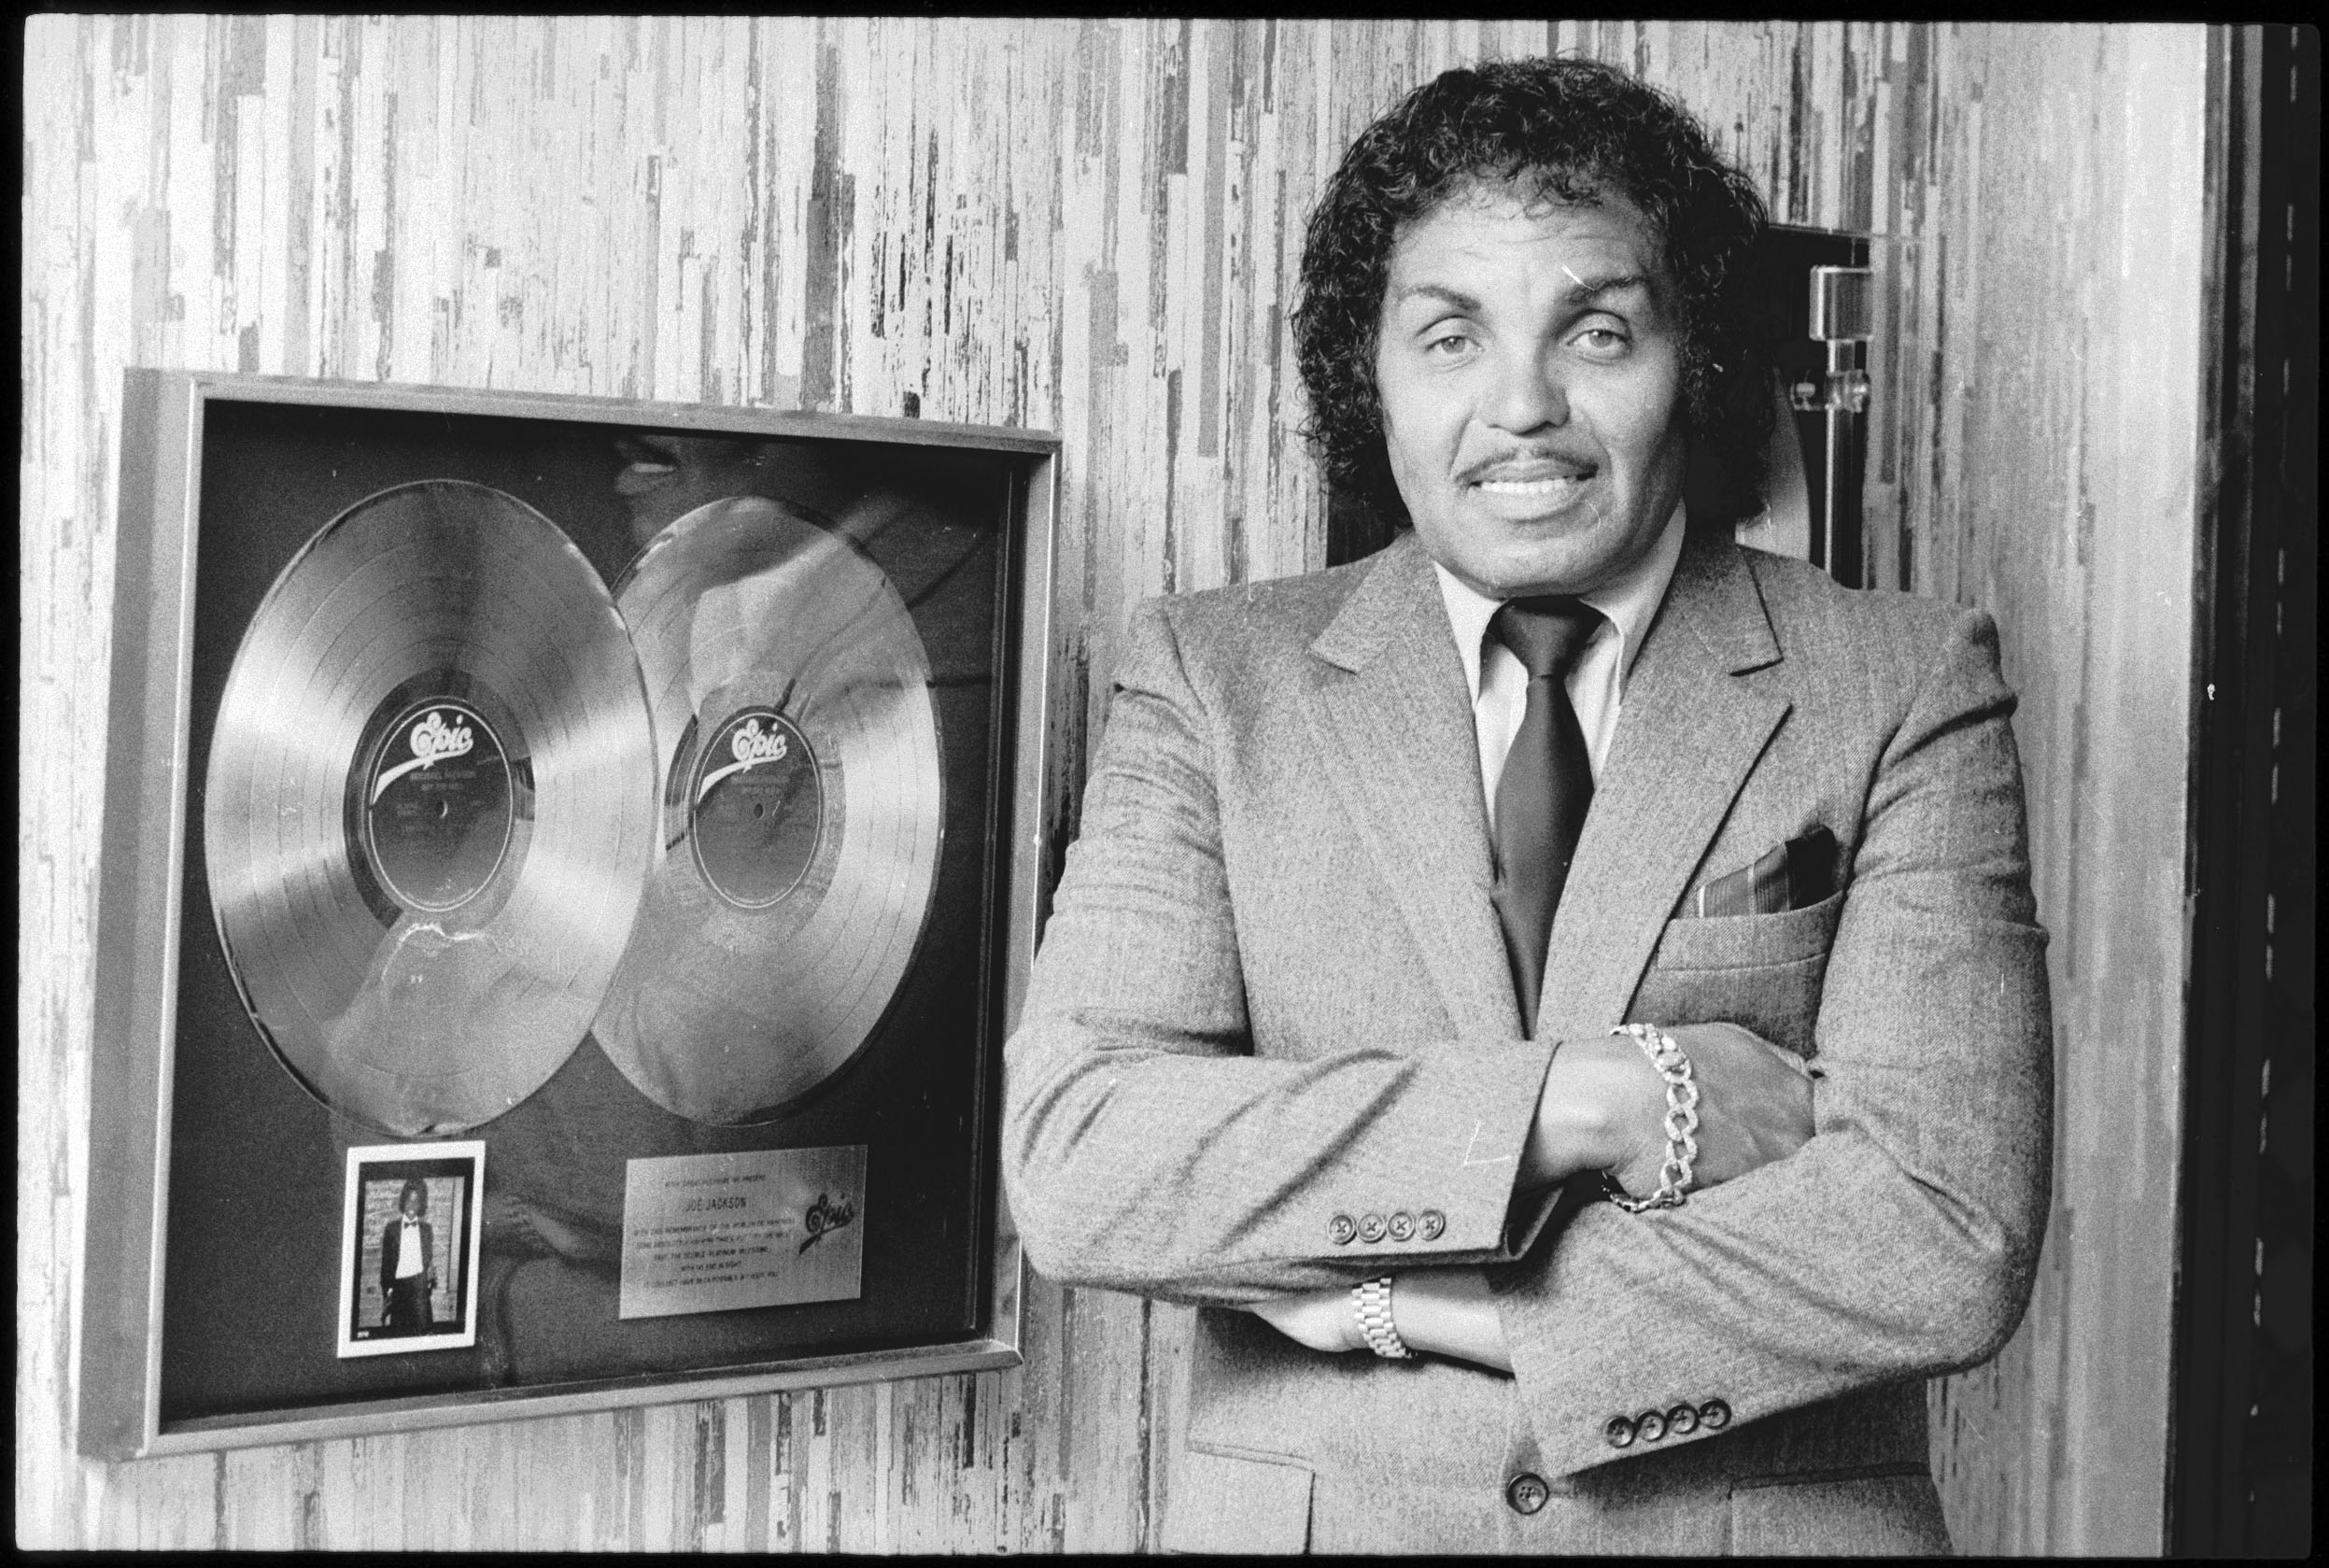 PHOTO: In this file photo, Joseph Jackson, father and manager of The Jackson Five, poses by an Epic double platinum award, circa 1982.